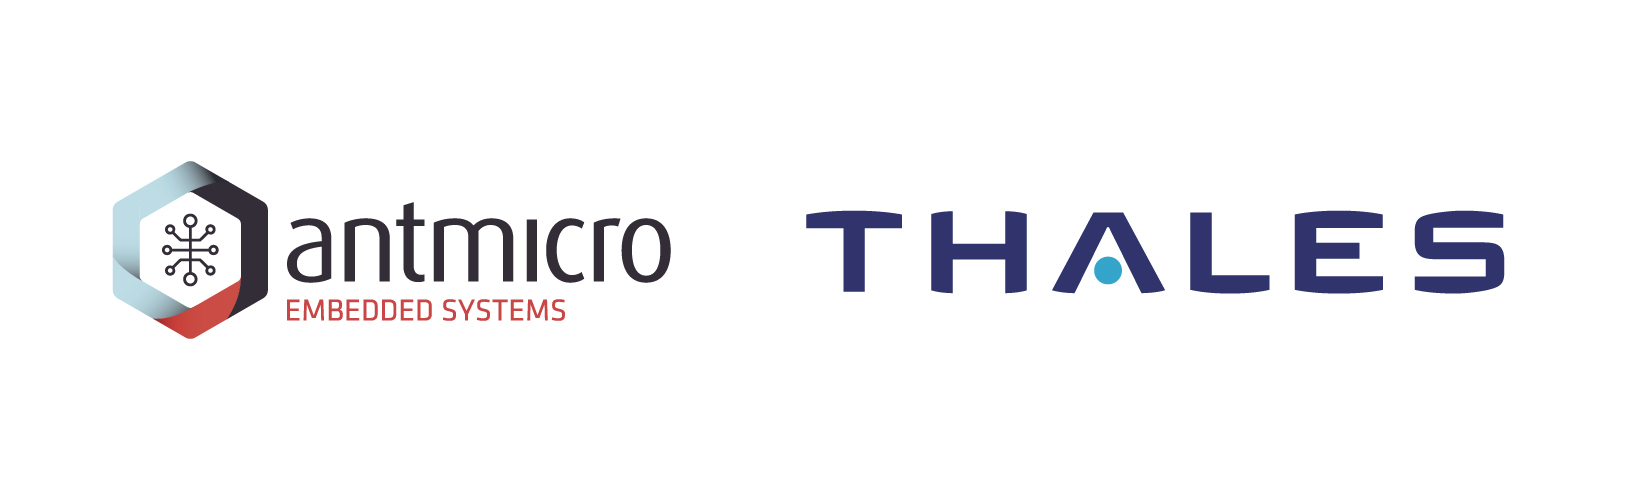 Partnership with Thales